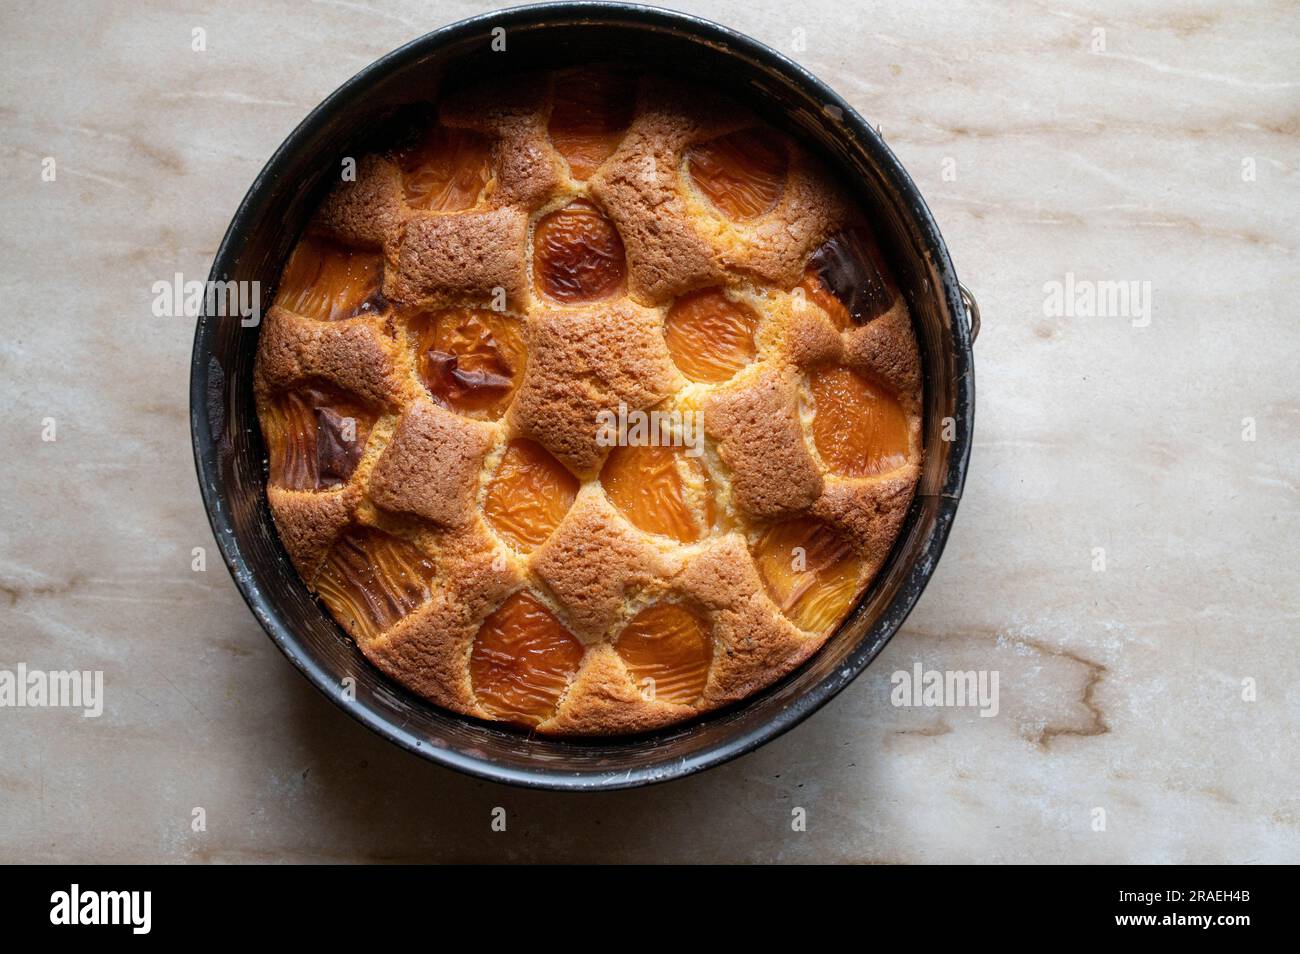 Apricot cake in a round cake pan isolated on light background Stock Photo